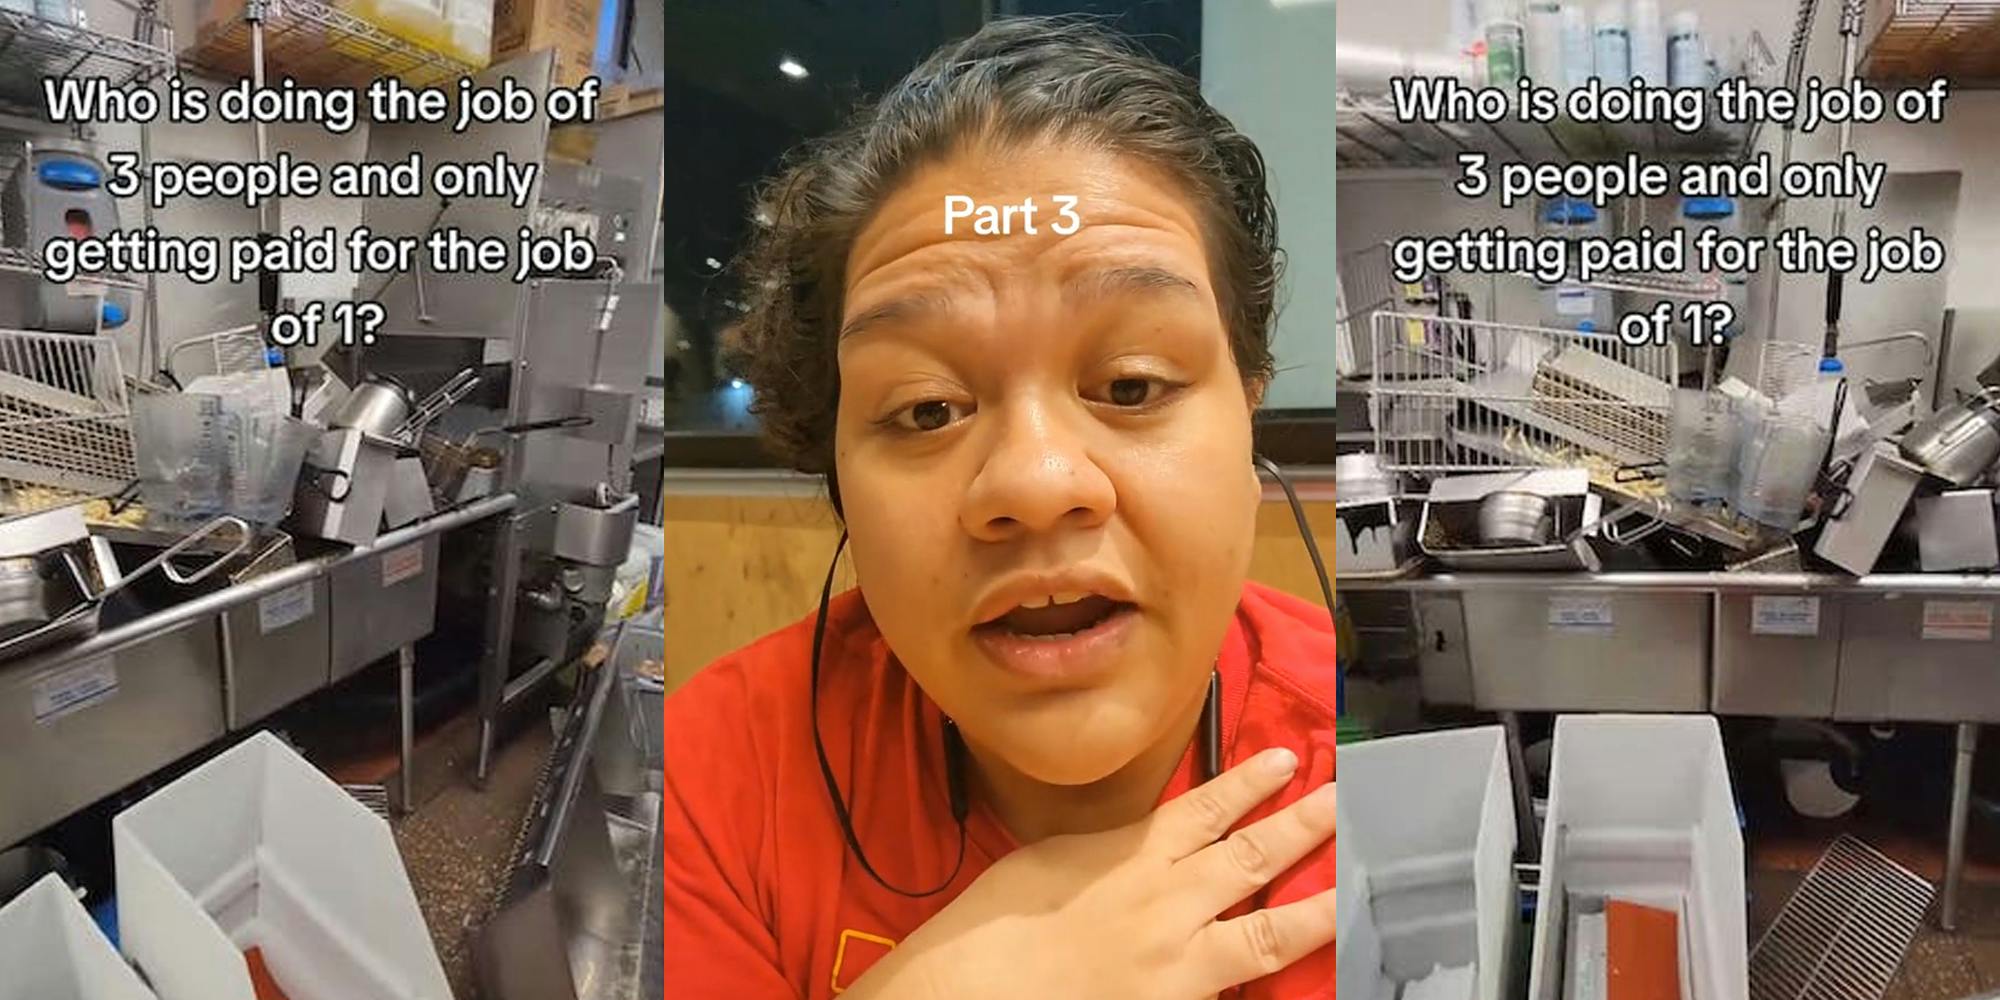 kitchen full of dirty dishes with caption "Who is doing the job of 3 people and only getting paid for the job of 1?" (l) worker speaking with caption "Part 3" (c) kitchen full of dirty dishes with caption "Who is doing the job of 3 people and only getting paid for the job of 1?" (r)